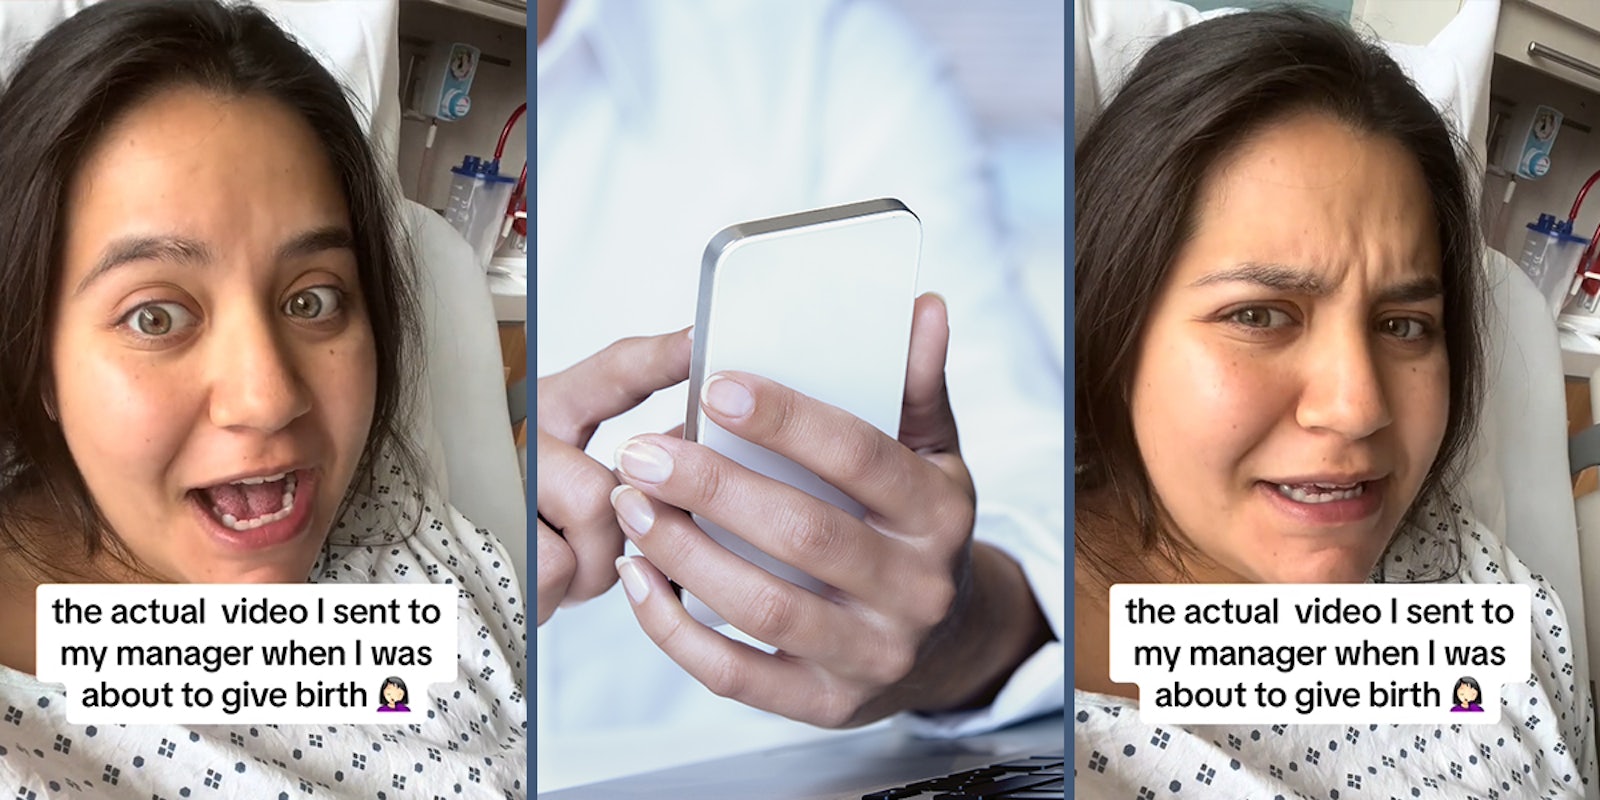 woman in hospital bed with caption 'the actual video I sent to my manager when I was about to give birth' (l) office woman holding phone (c) woman in hospital bed with caption 'the actual video I sent to my manager when I was about to give birth' (r)